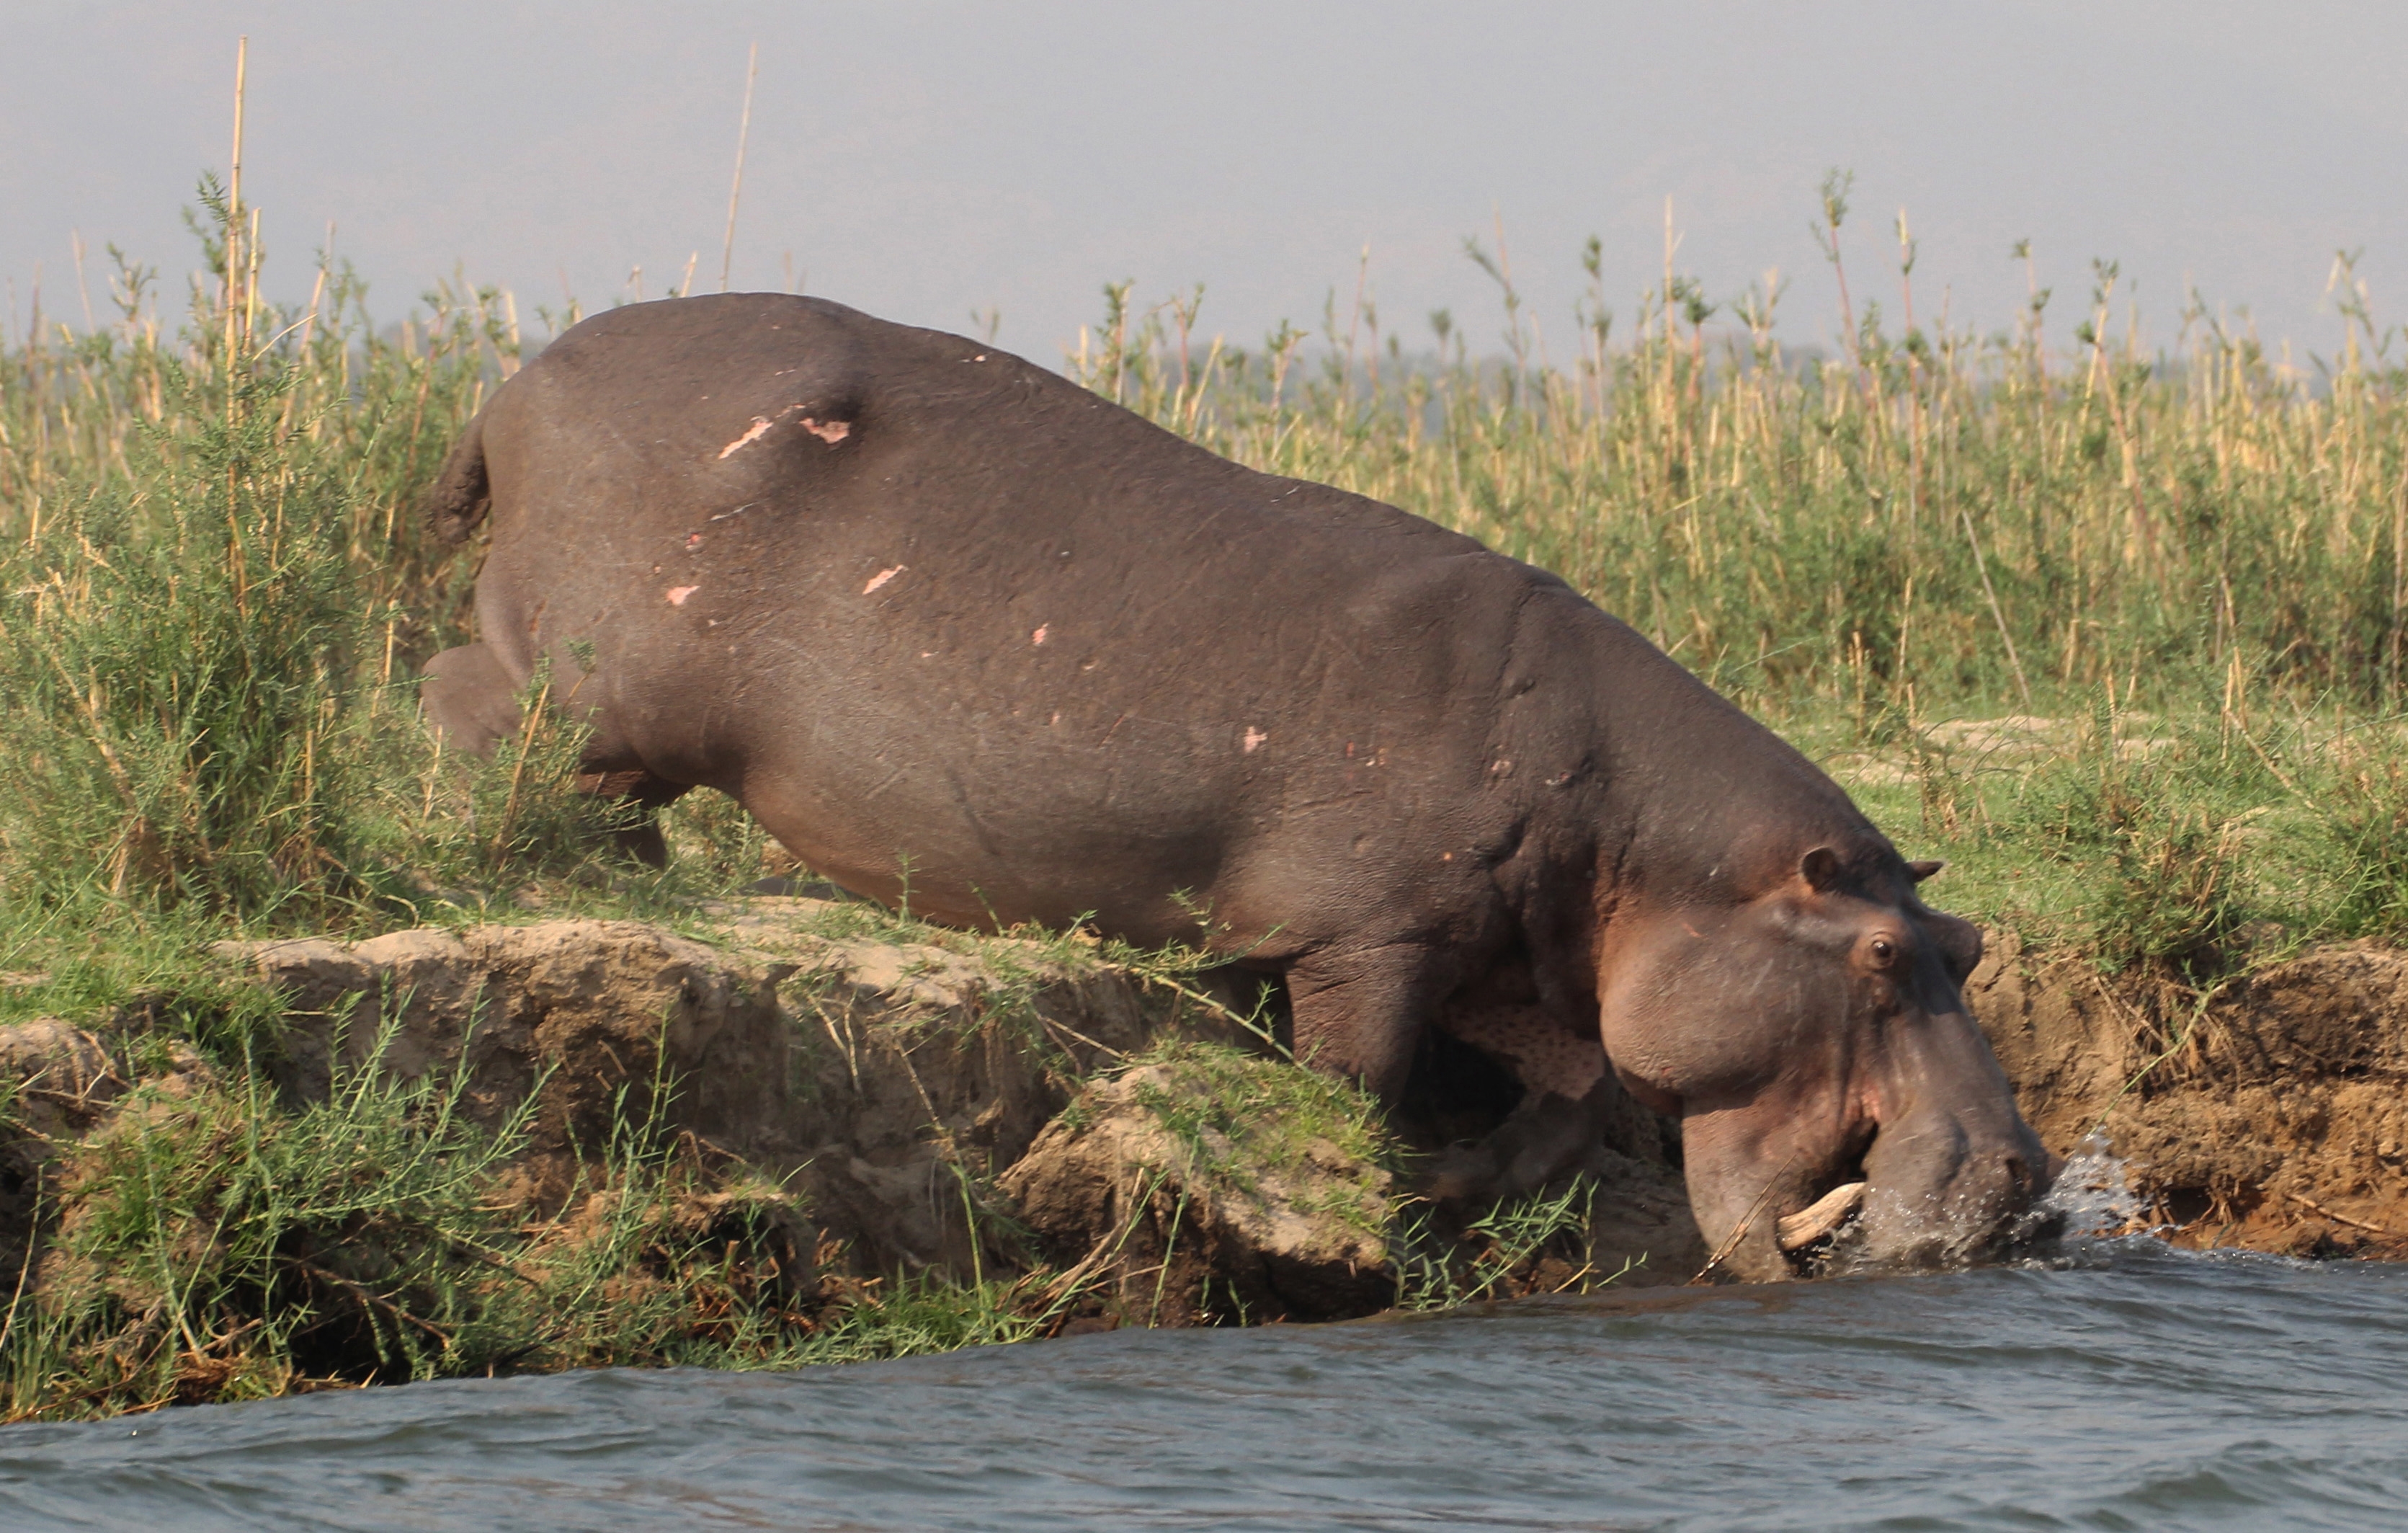 Hippo walking into the water for taking a bath at lower Zambesi River